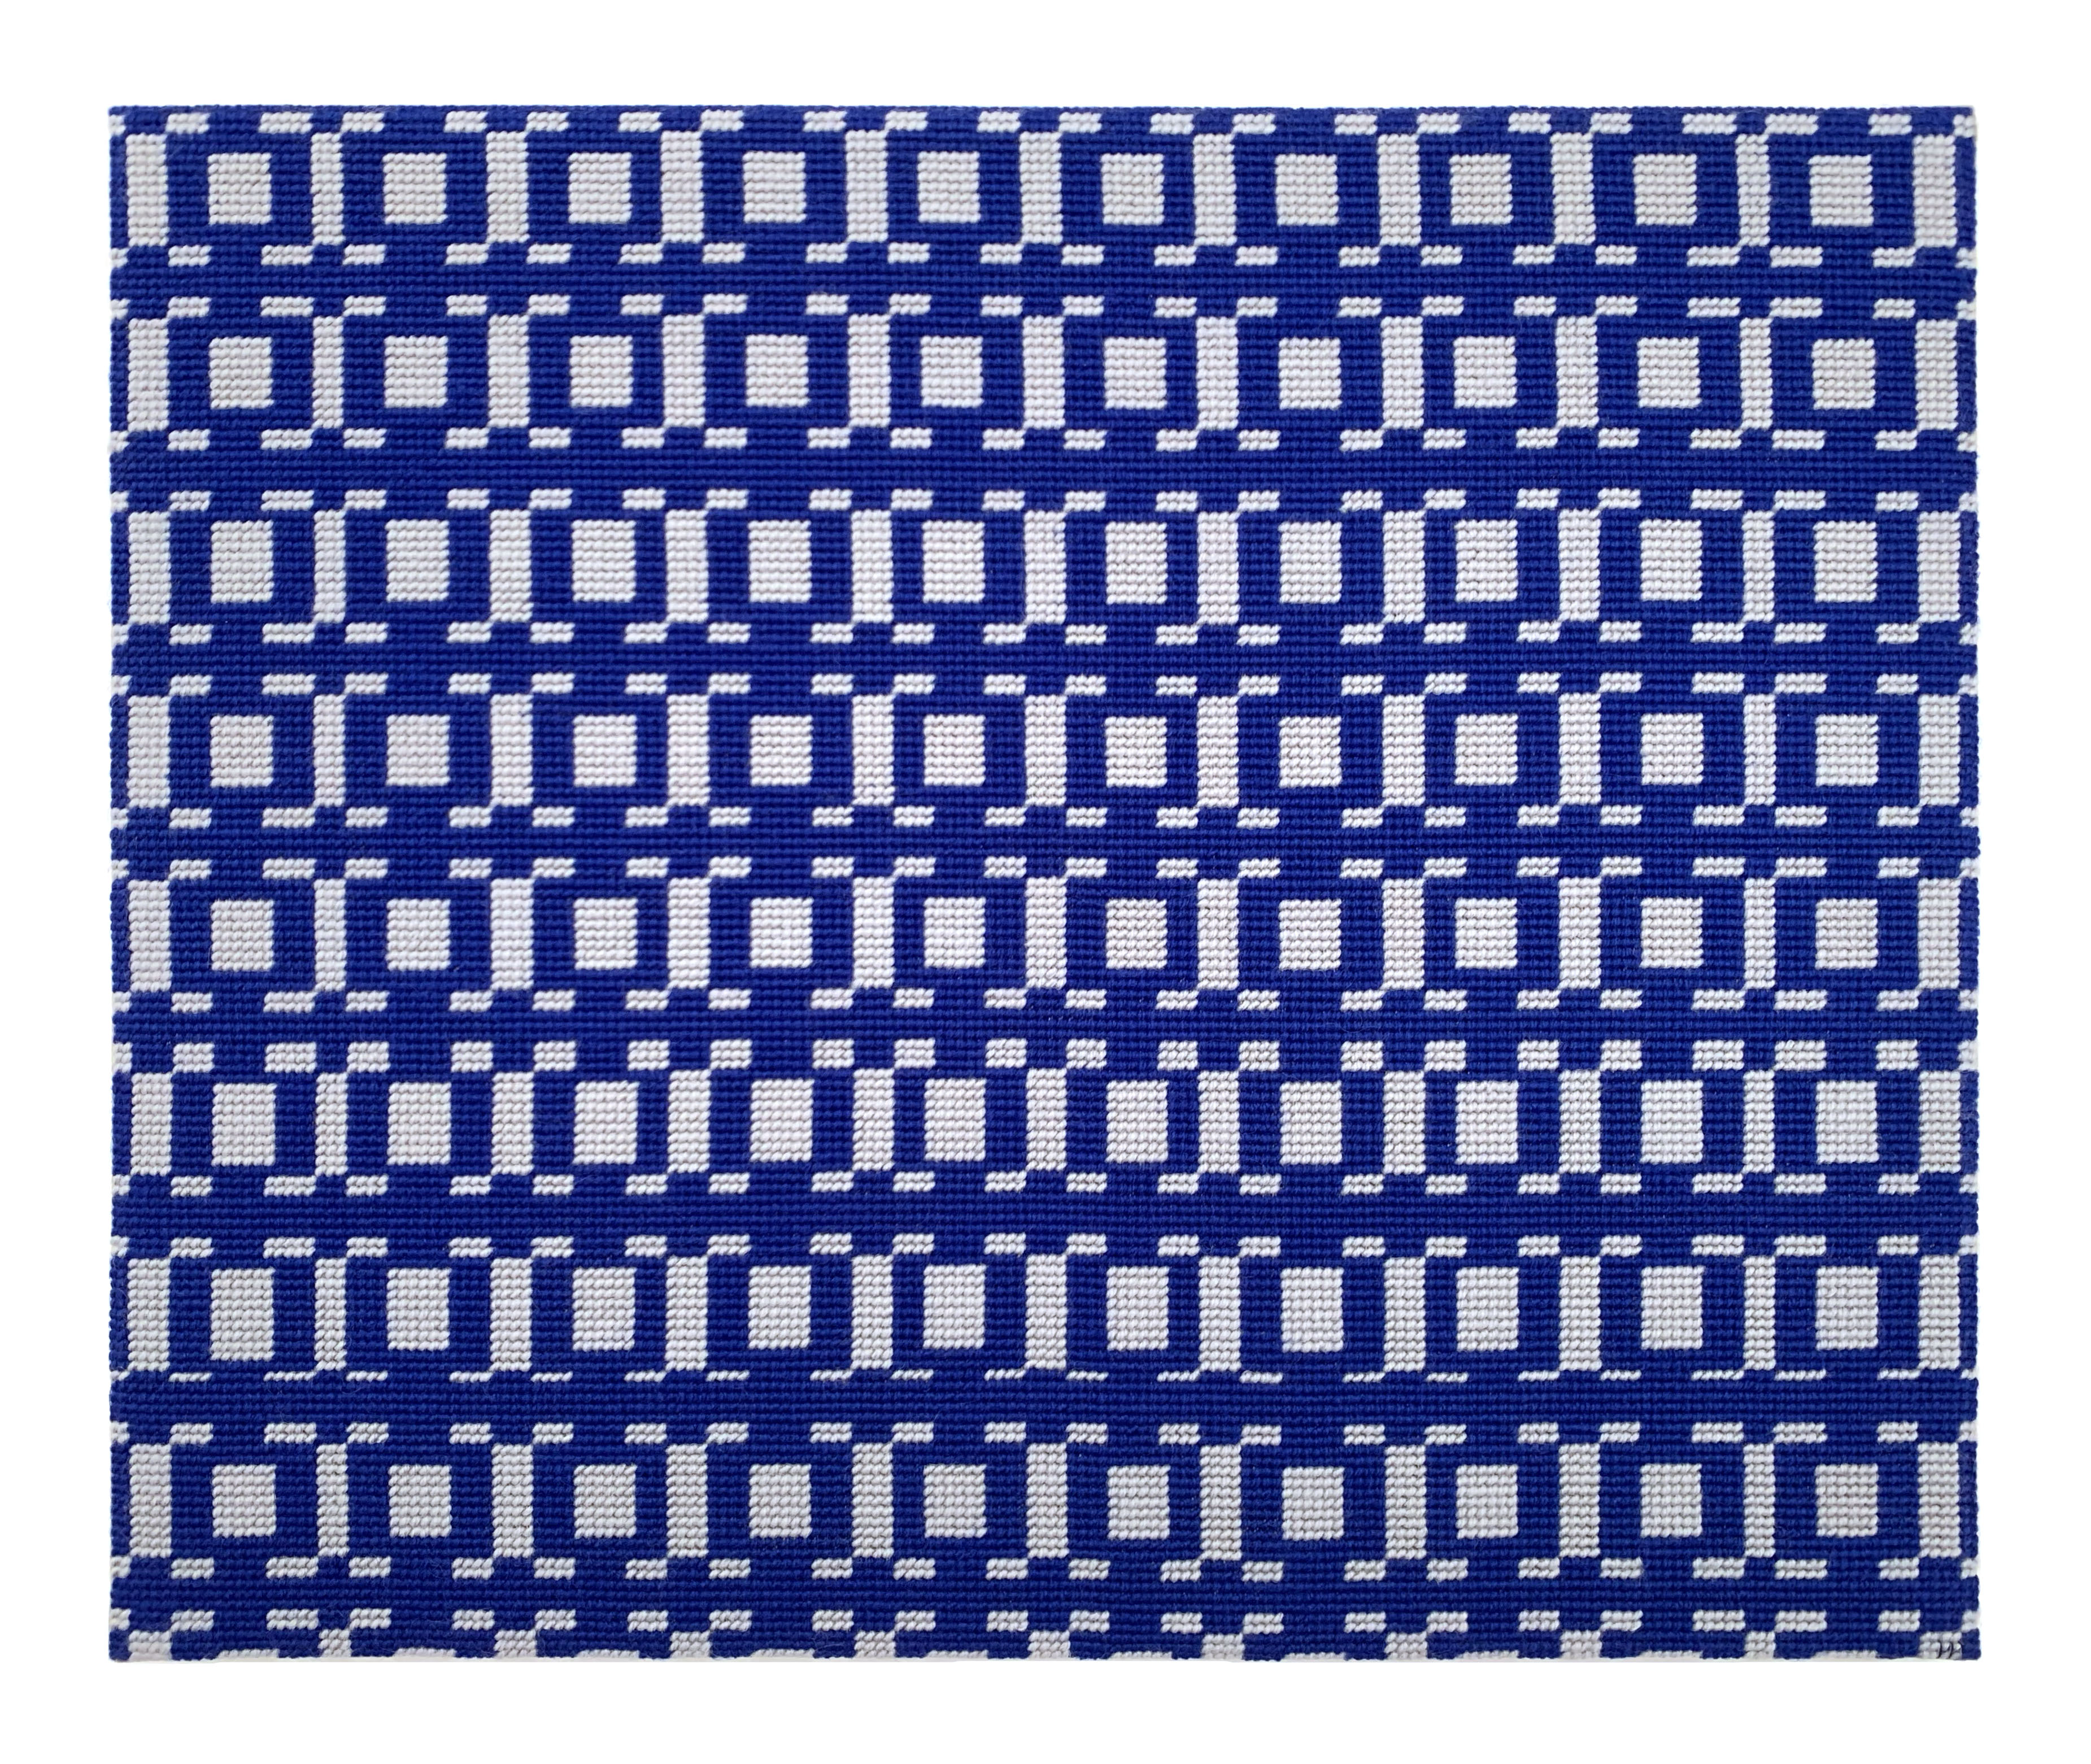  / Needlepoint of a wallpaper in one of the rooms of the mansion in *Maniac Mansion*—video game conceived by Ron Gilbert and Gary Winnick—in its C64 version. Art by artist Marine Beaufils.